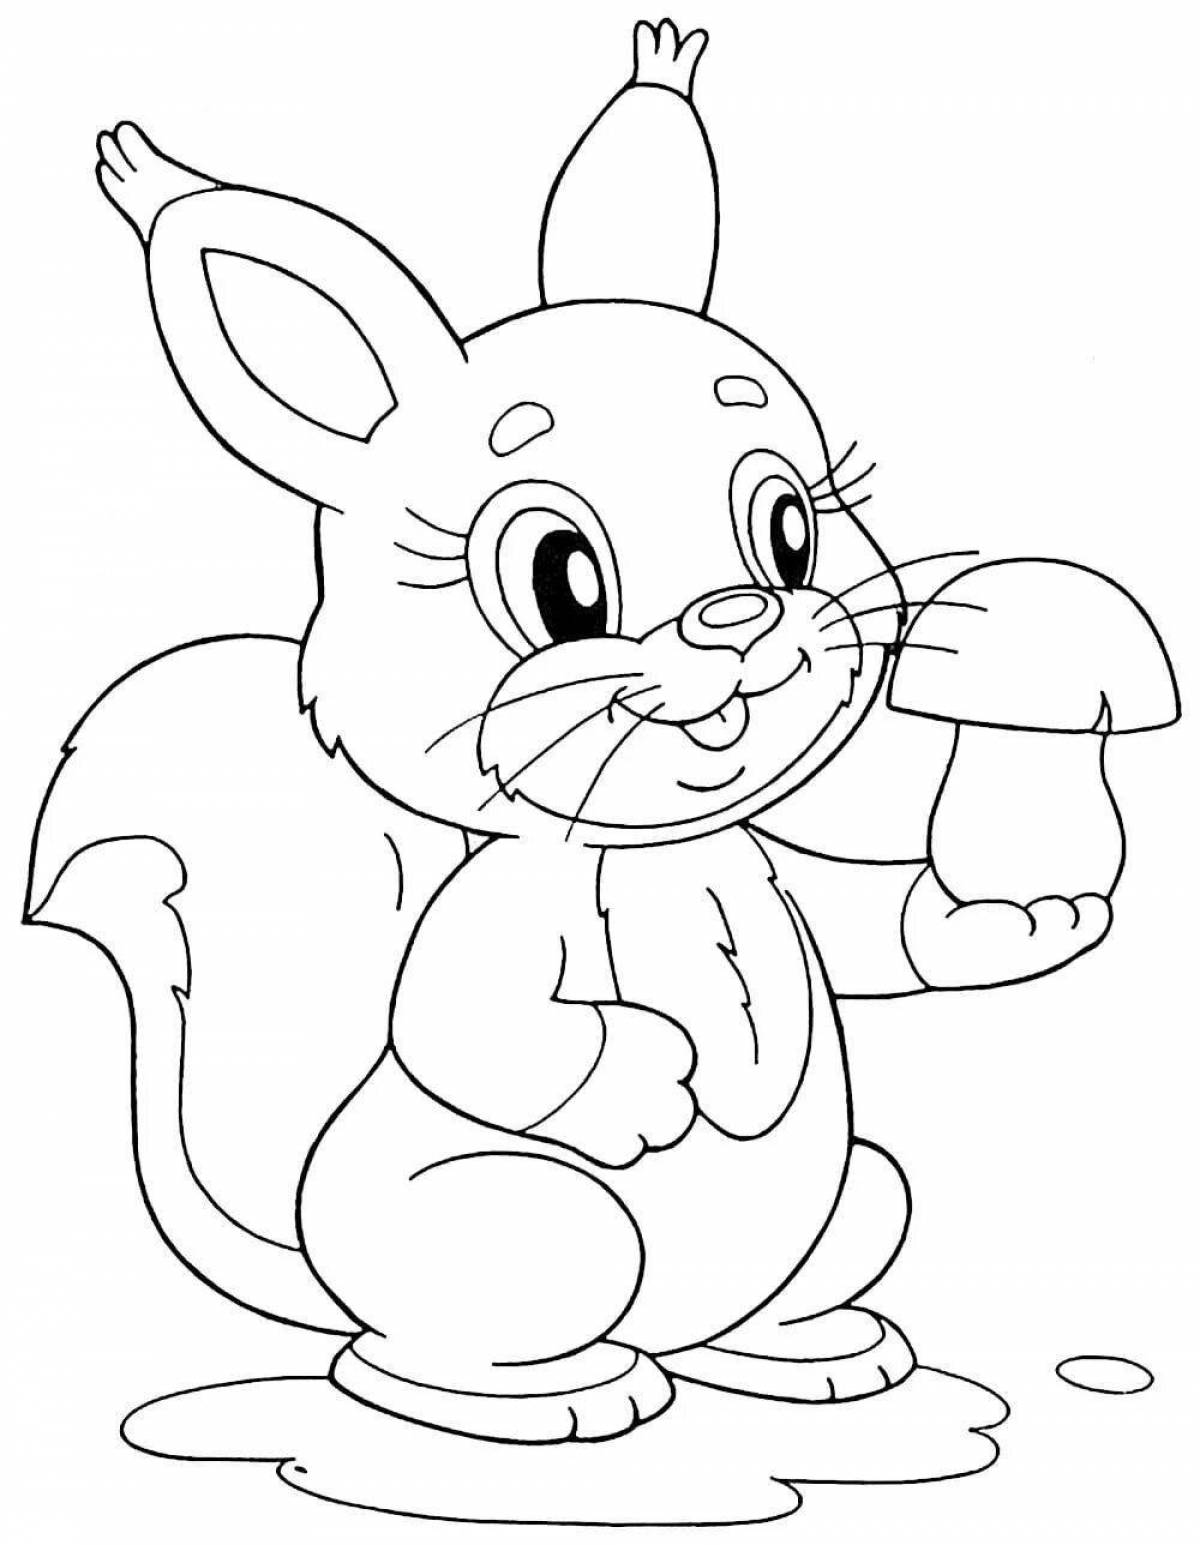 Fun animal coloring pages for kids